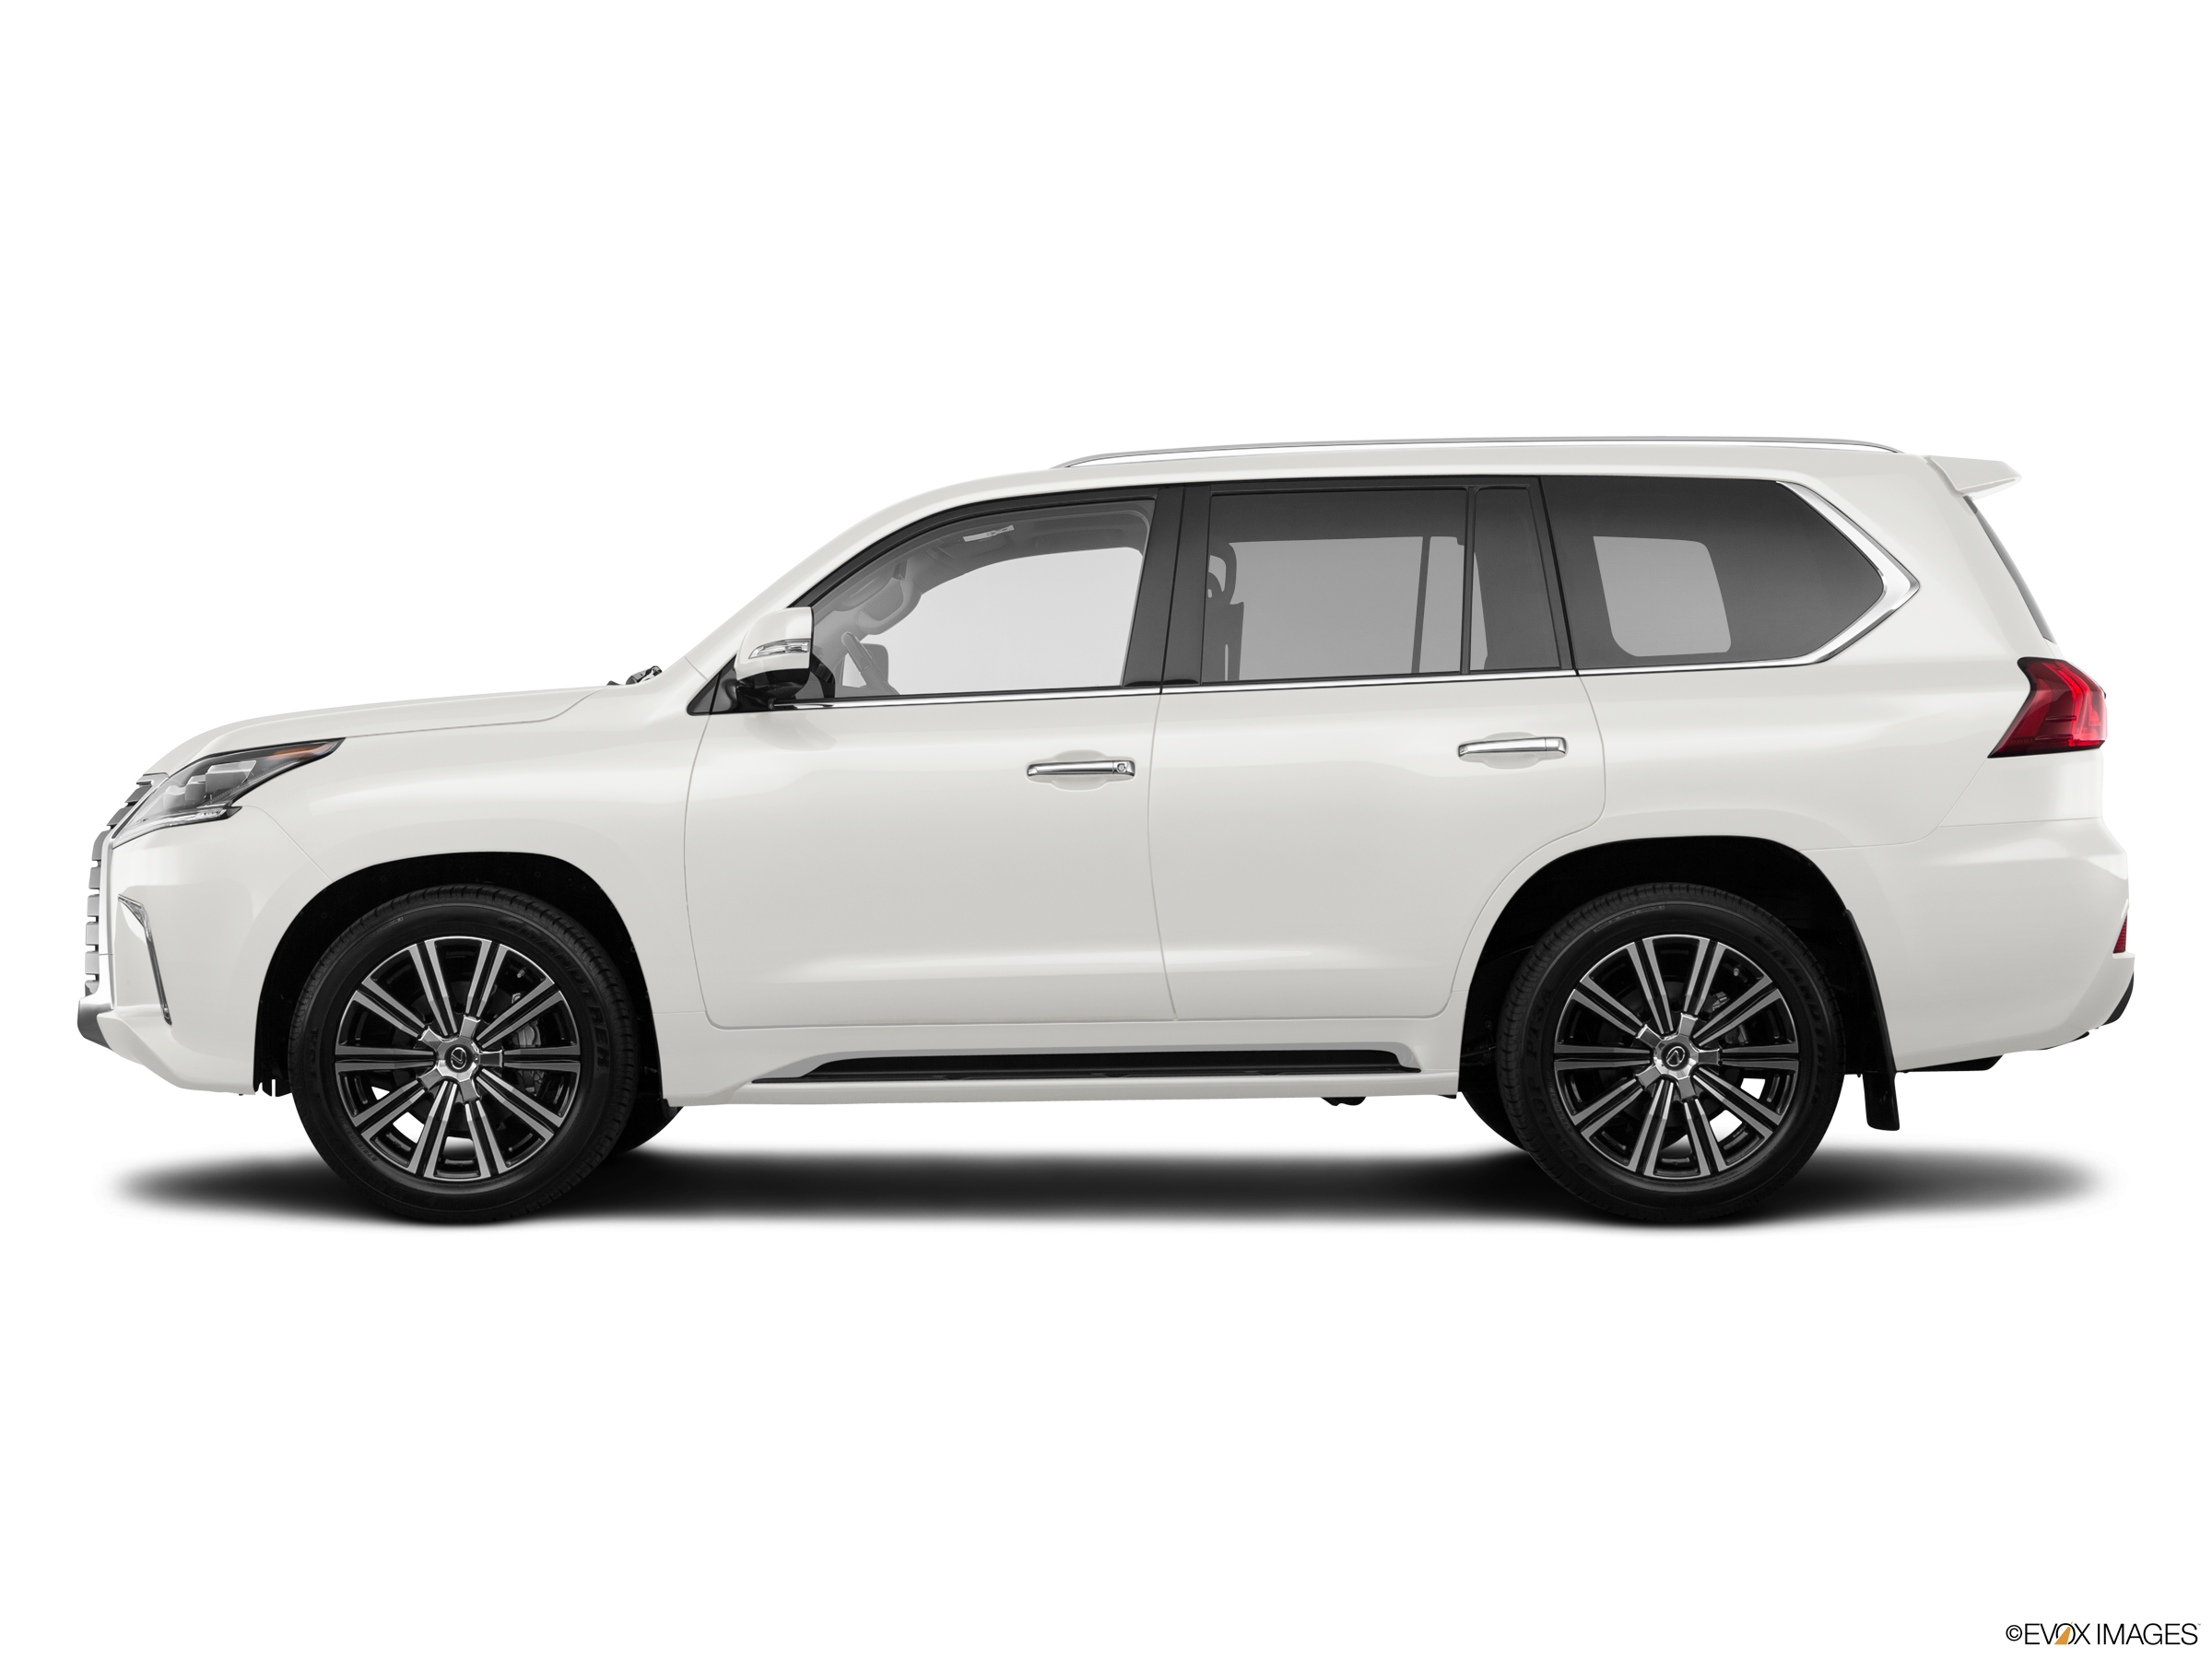 Curbside Review: 2020 Lexus LX570 - Comfortably Numb, Done Very Comfortably  Indeed - Curbside Classic